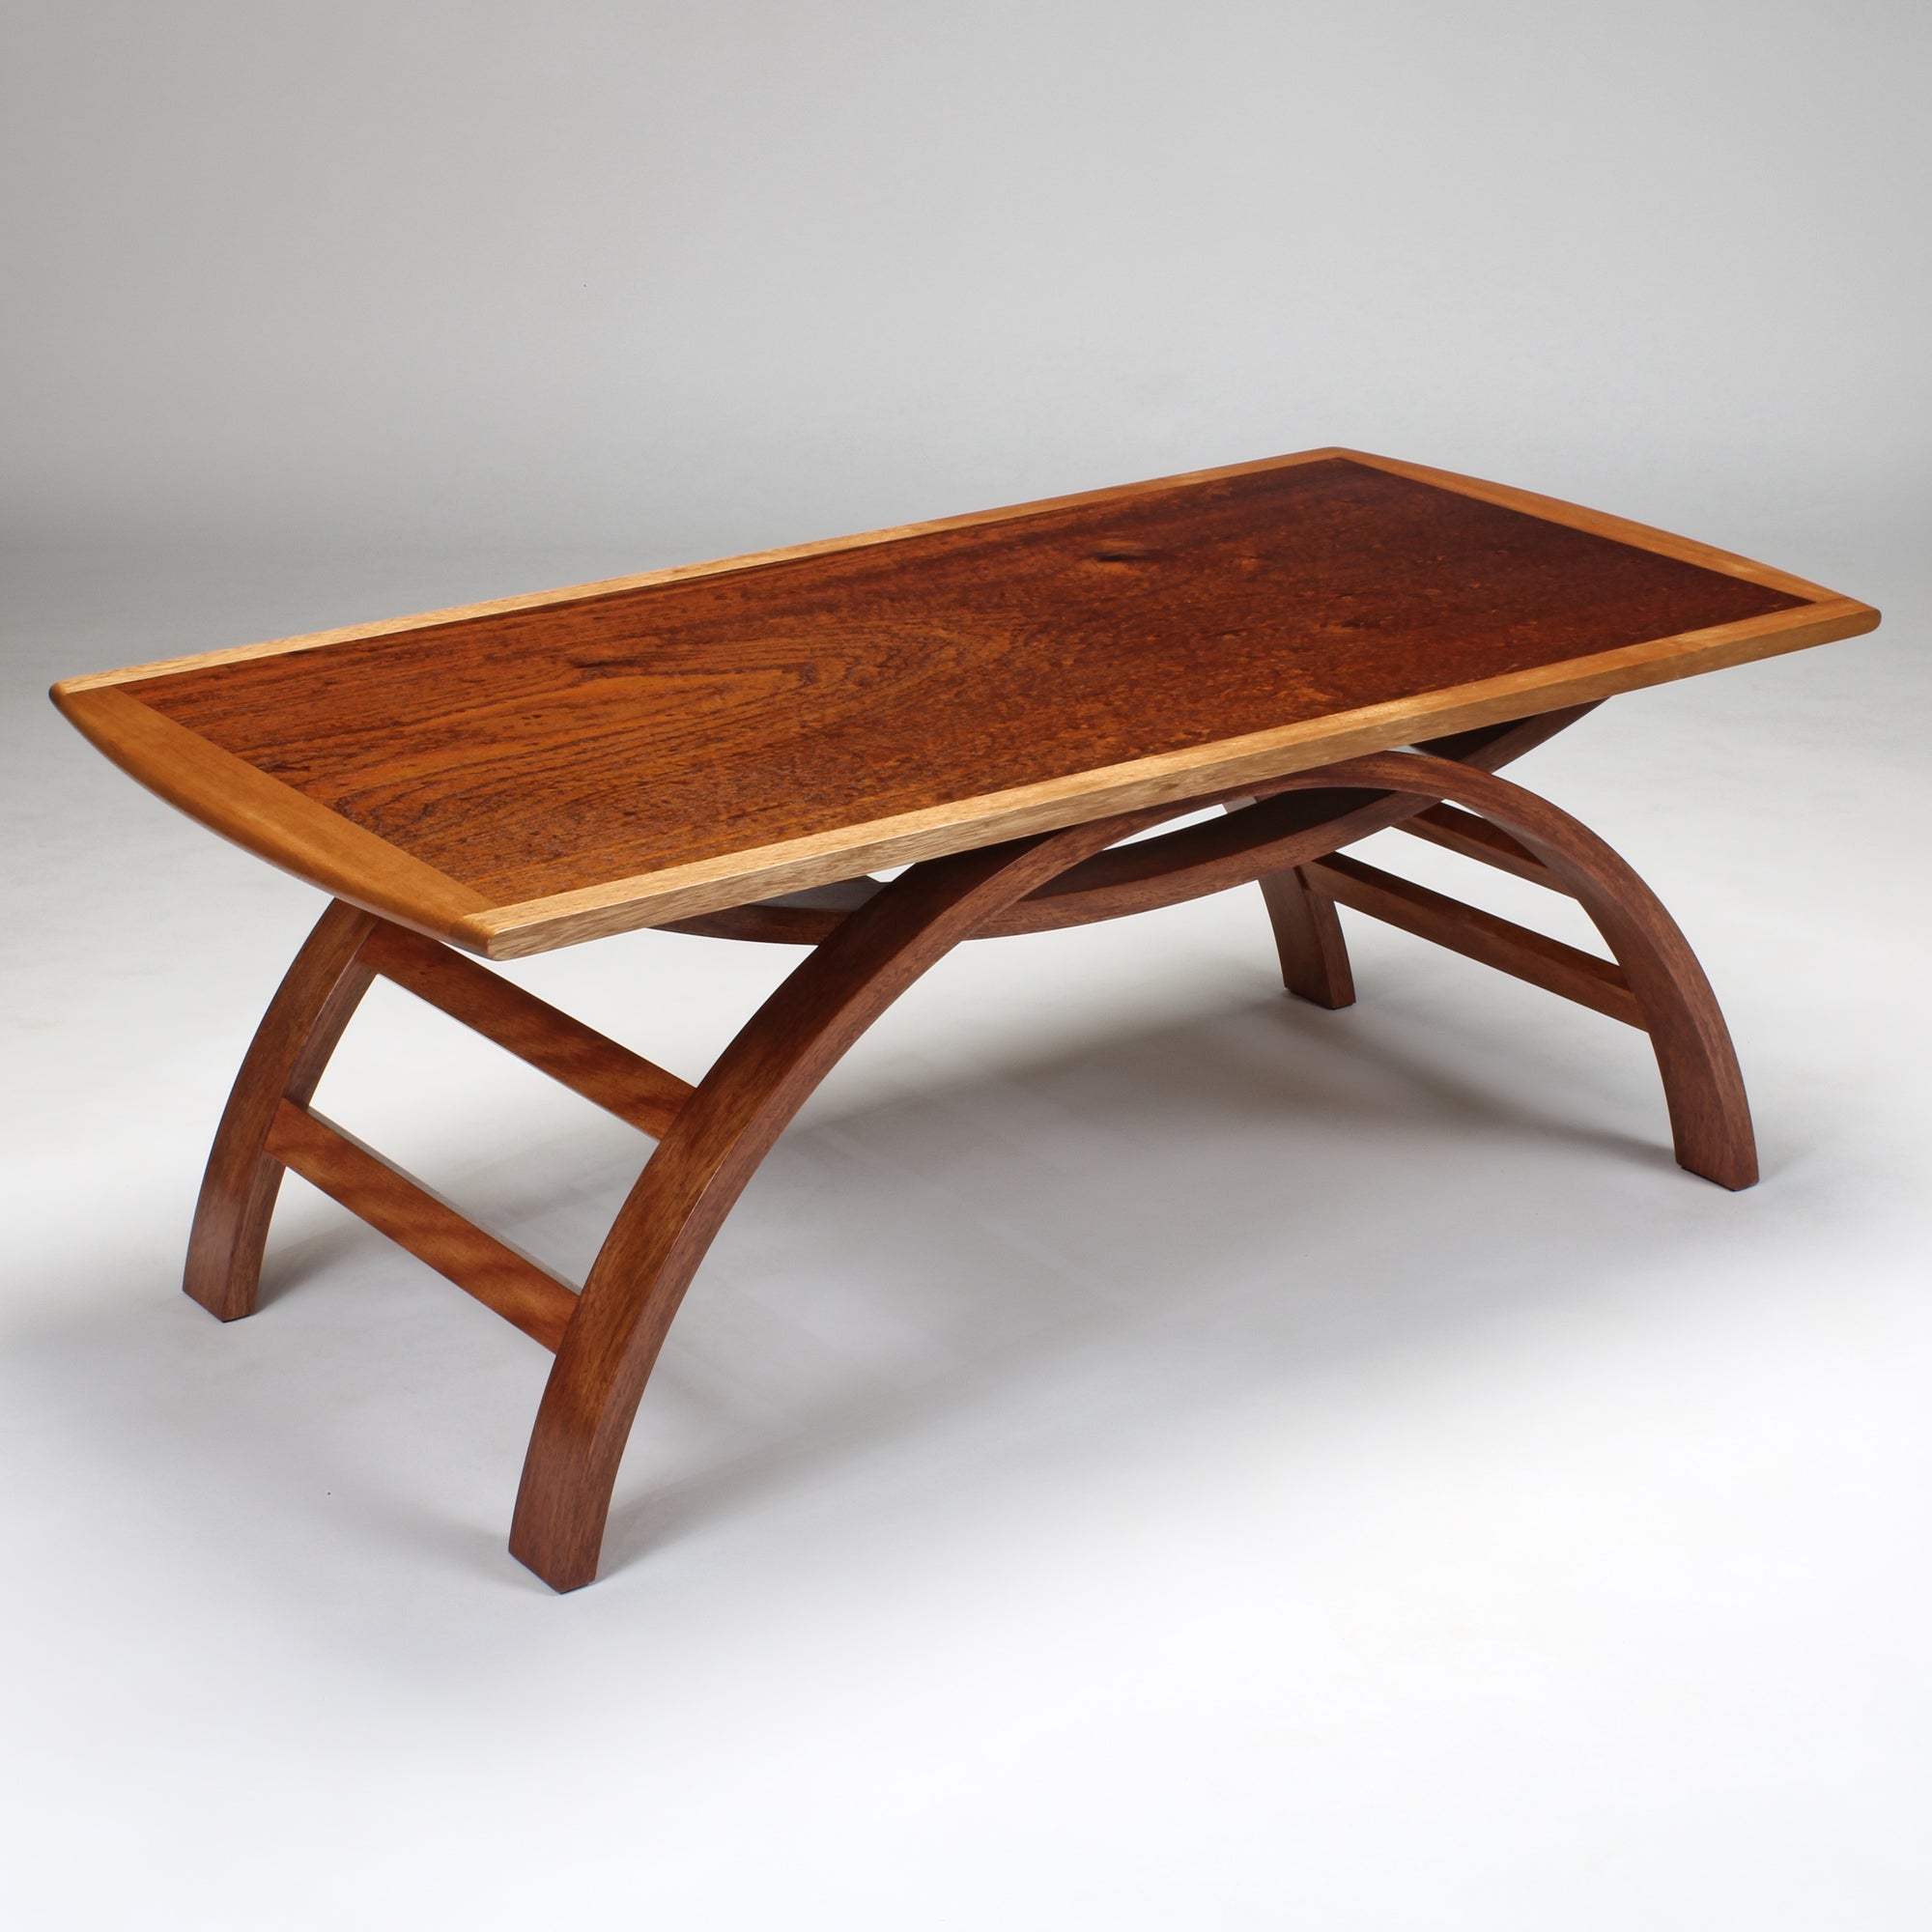 Archimedes Coffee Table #45